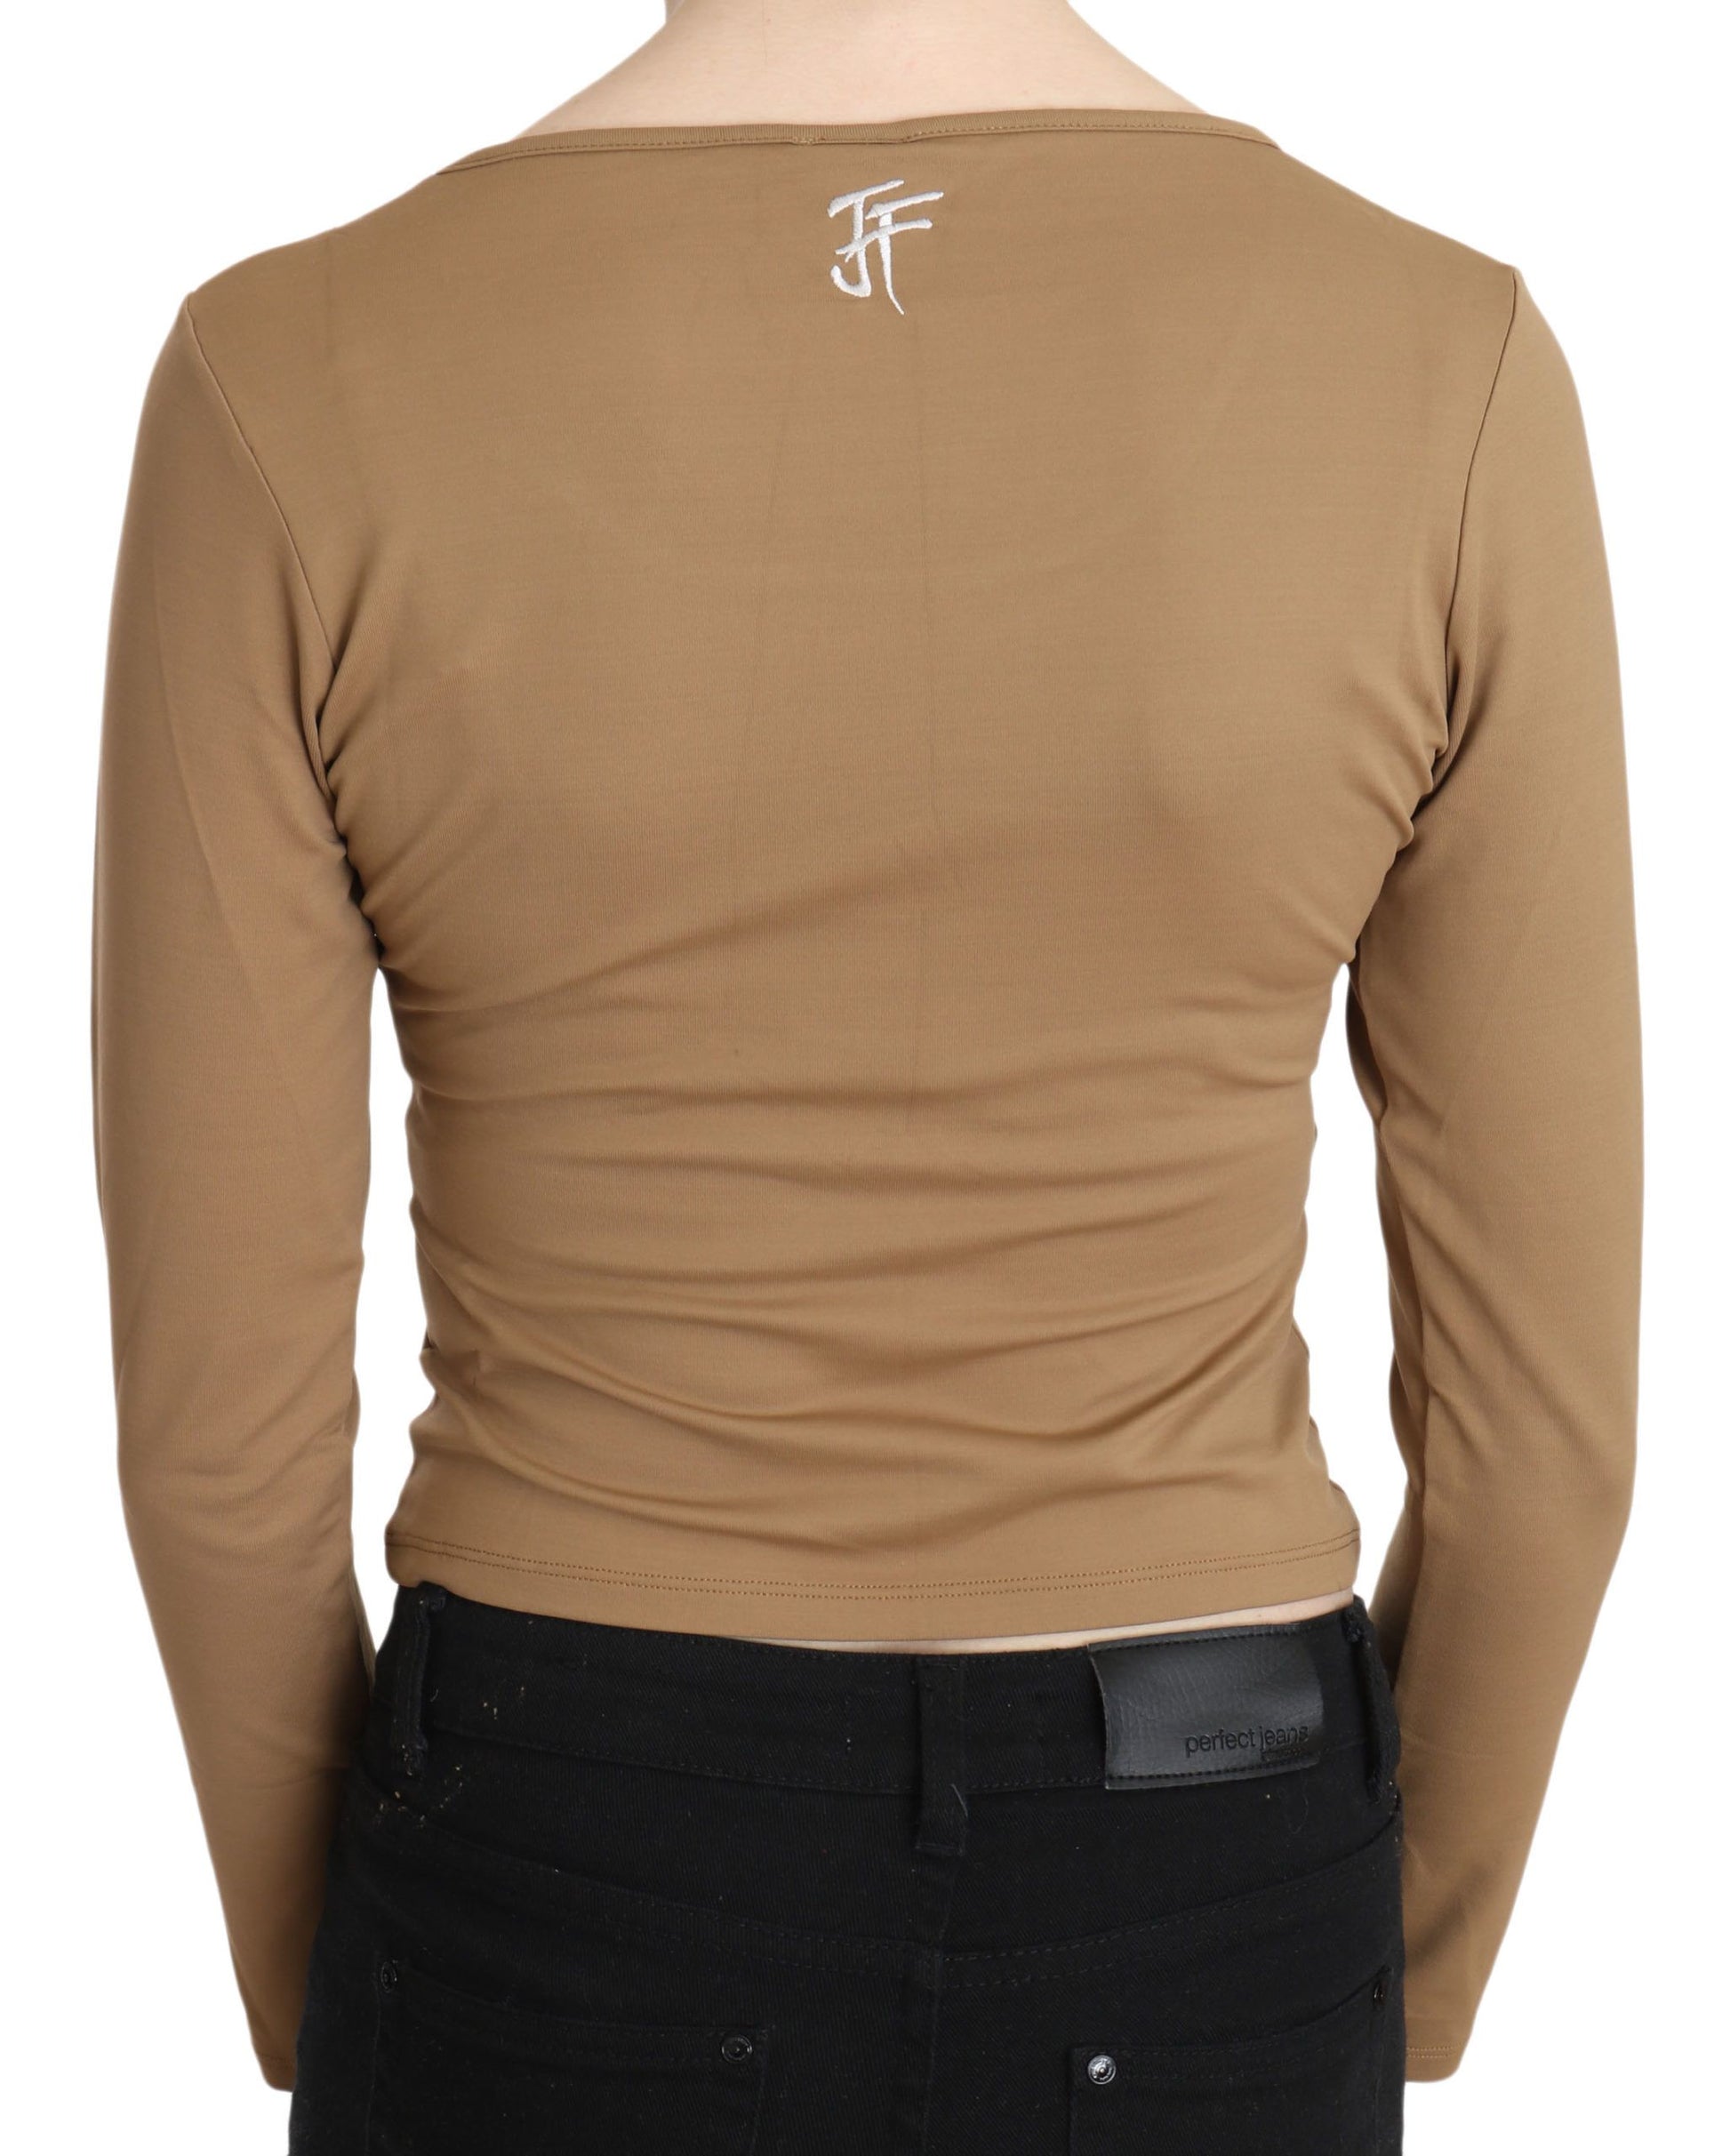 Brown Round Neck Long Sleeve Slim Crop Top Blouse - Designed by GF Ferre Available to Buy at a Discounted Price on Moon Behind The Hill Online Designer Discount Store